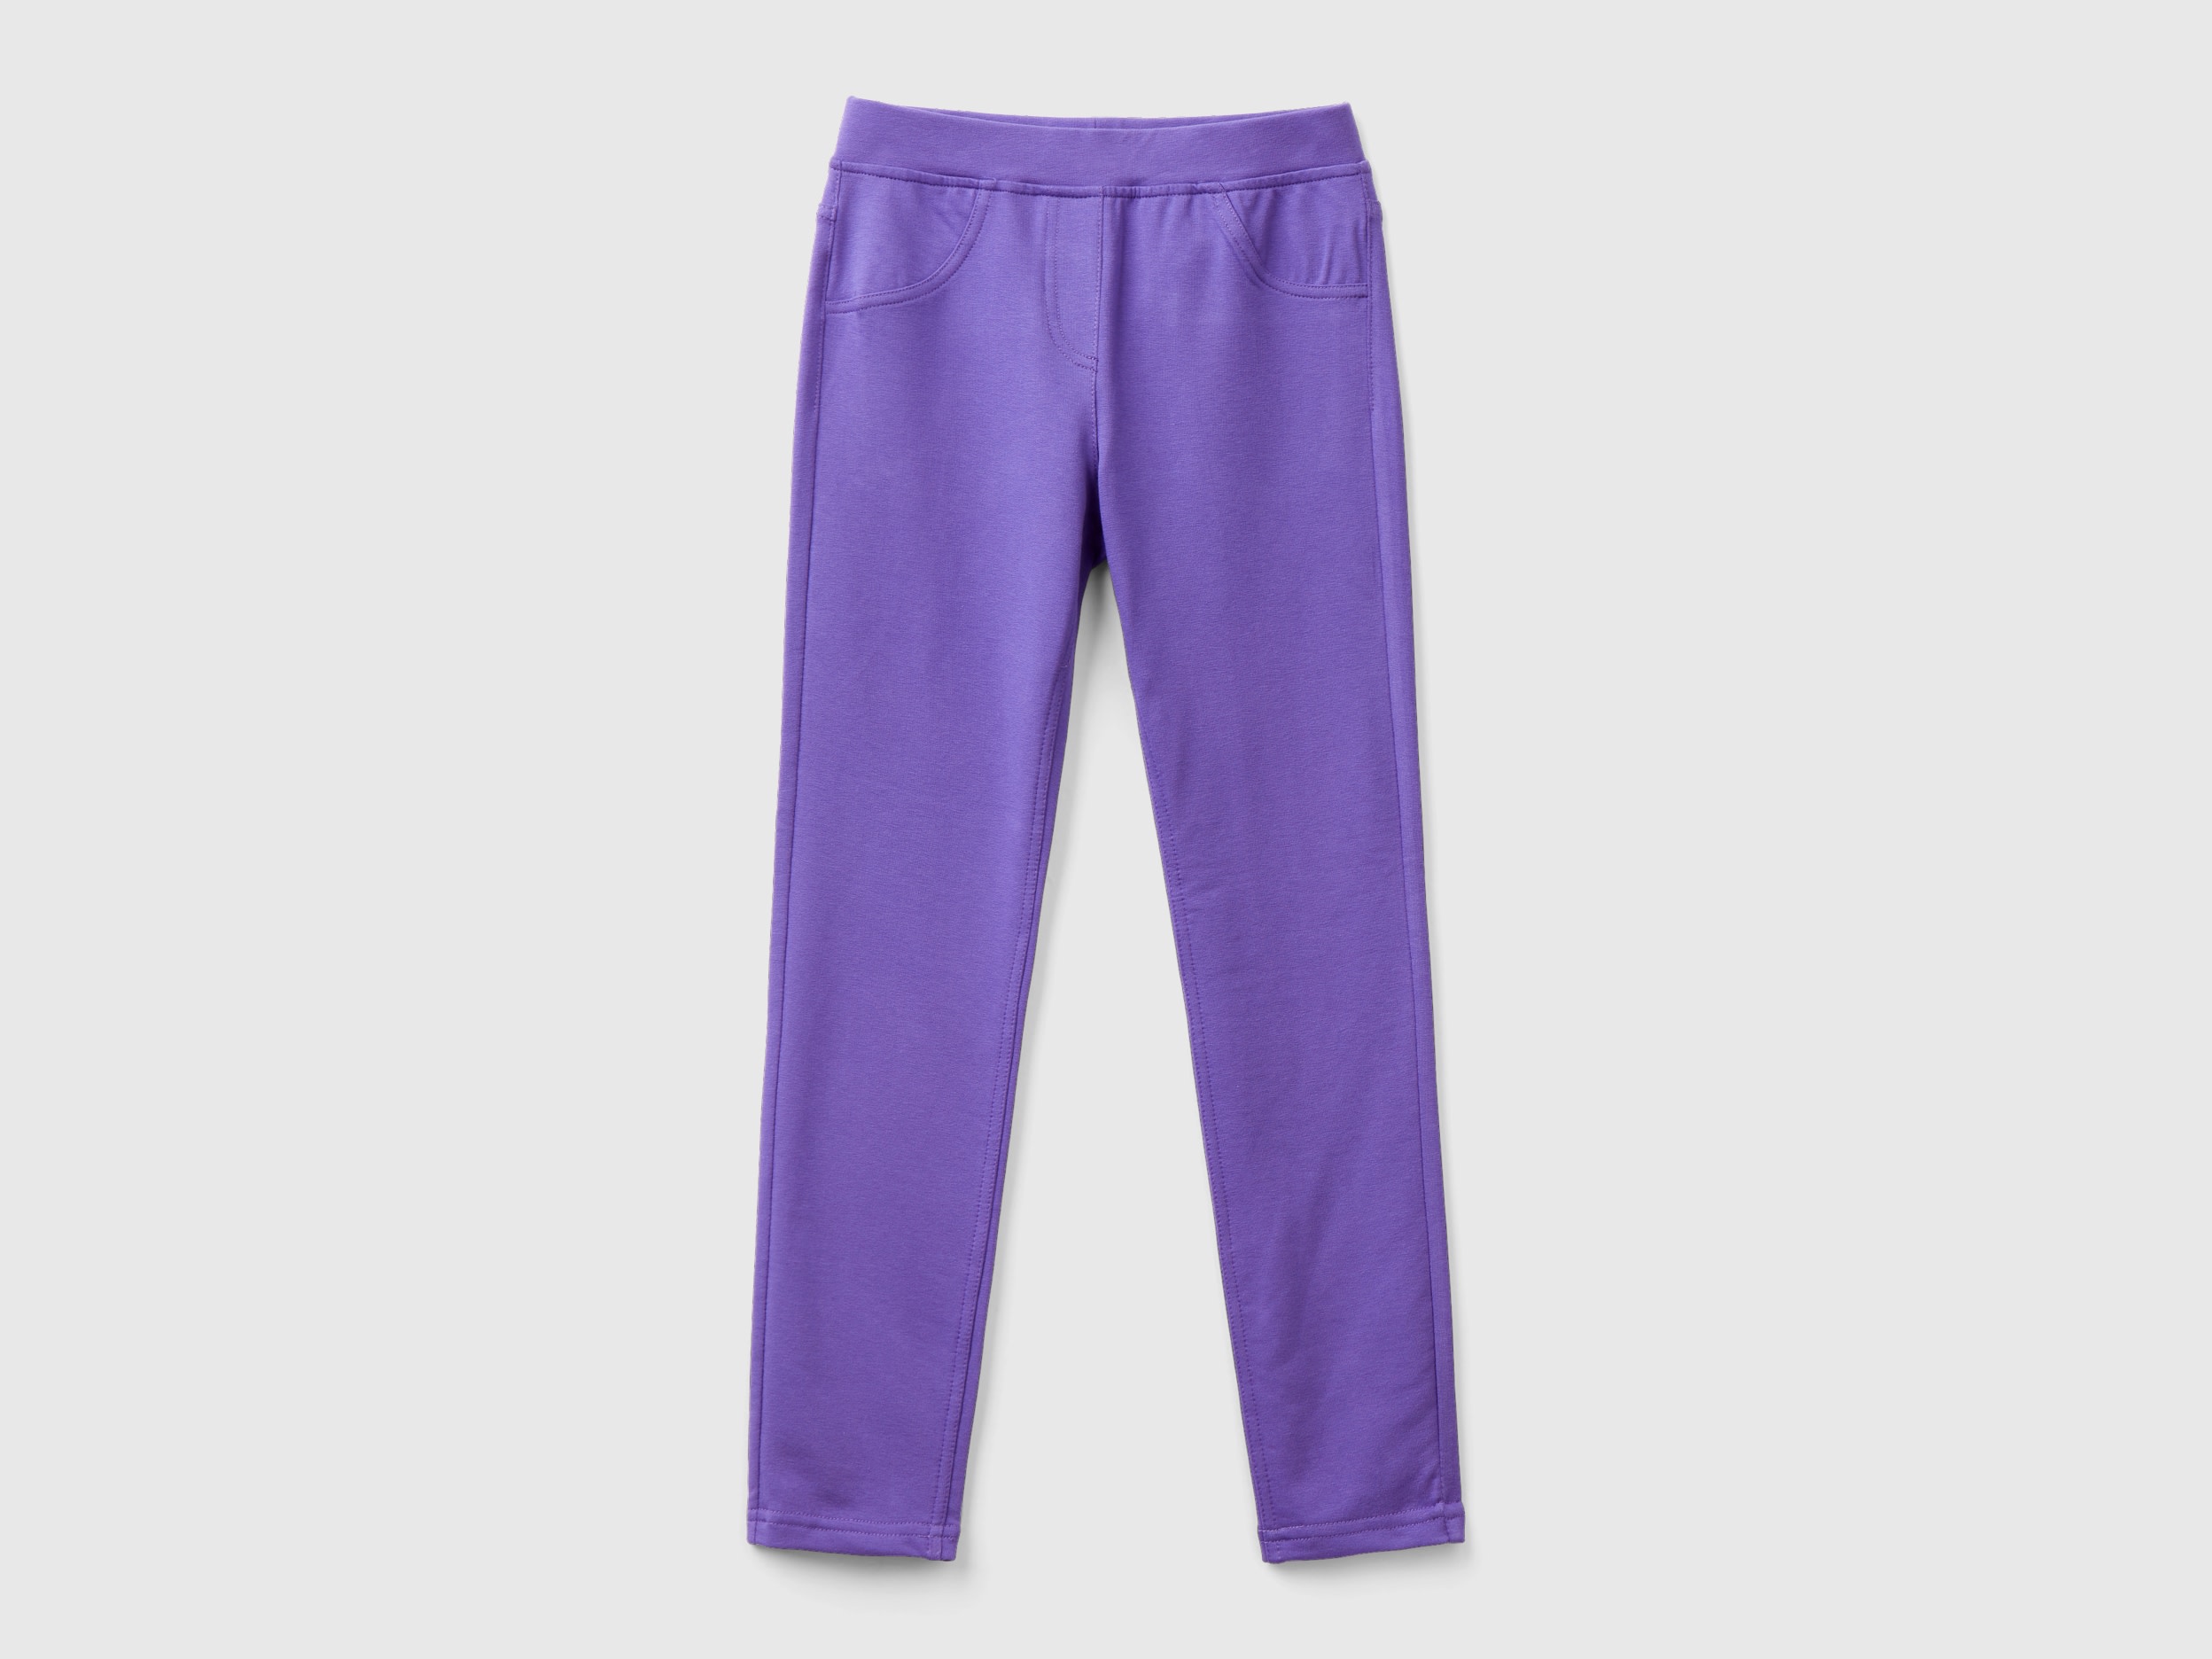 Benetton, Stretch Sweat Fabric Jeggings, size M, Violet, Kids